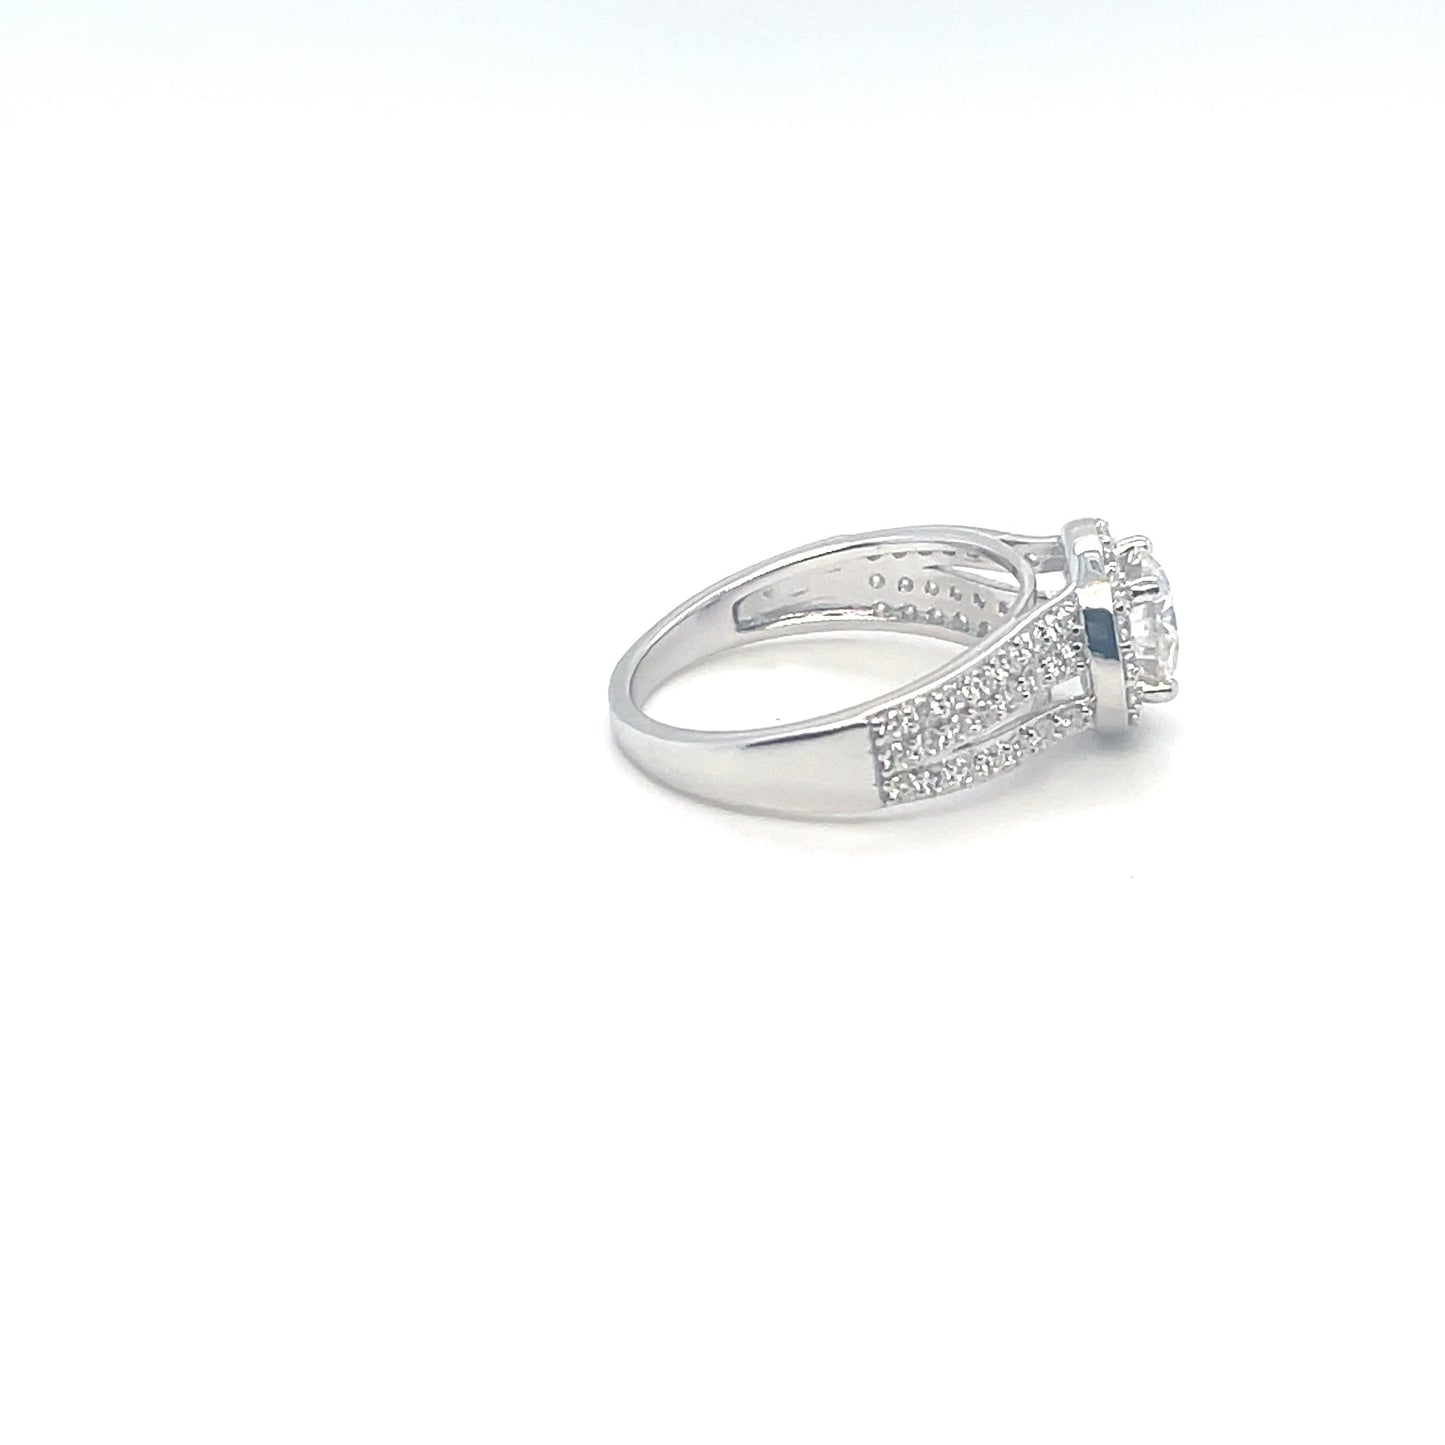 TTT Platinum Plated, Sterling Silver Ring w/1 Ct Round, Halo & Moissanite Gemstone Accents